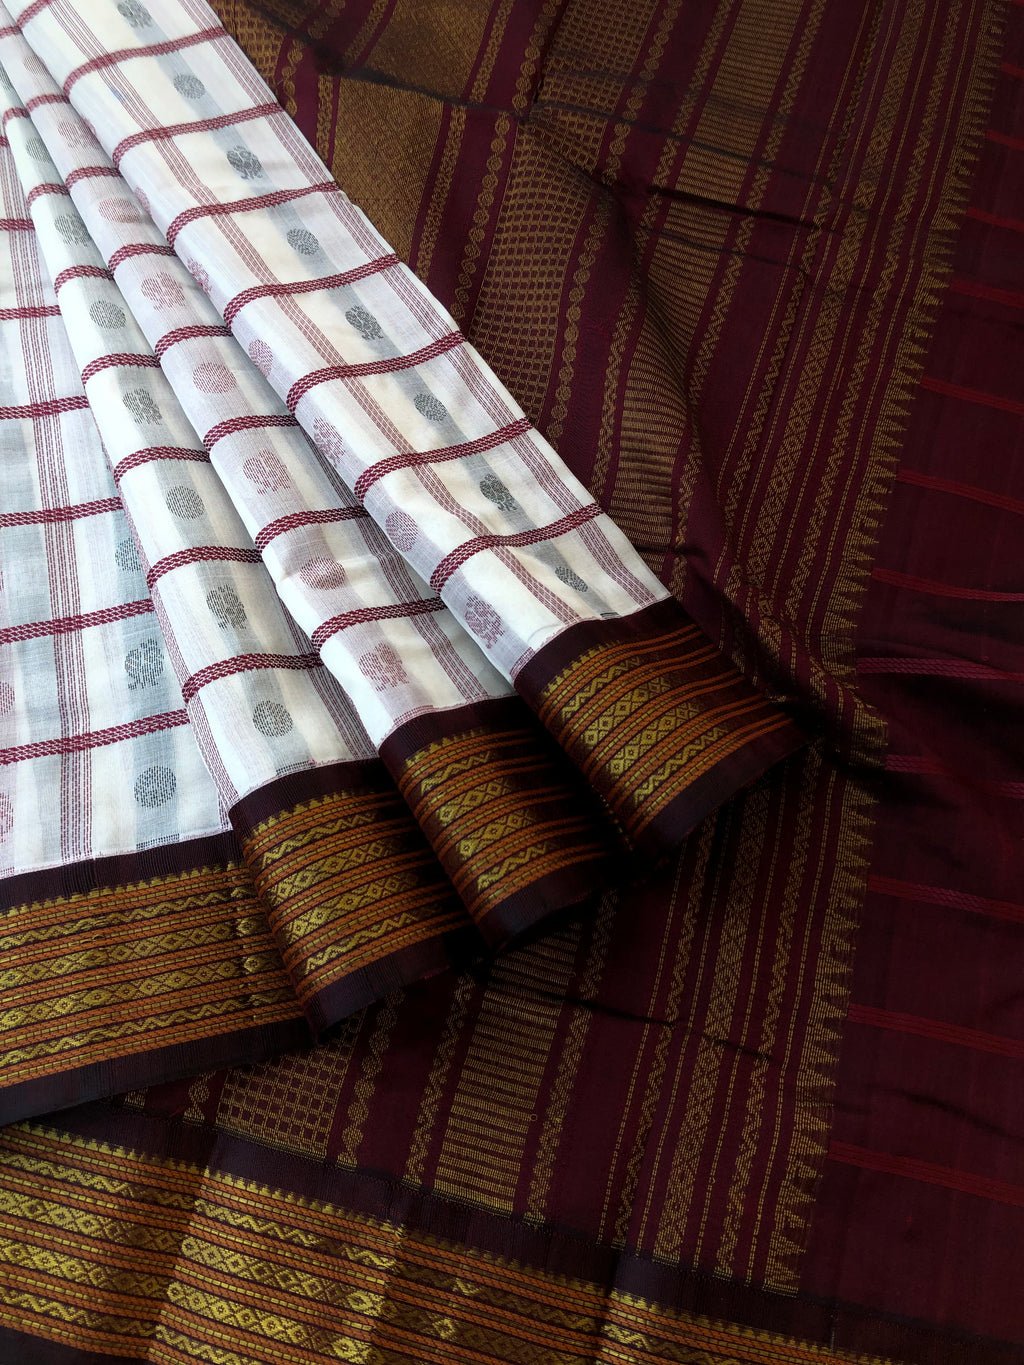 Divyam - Korvai Silk Cotton with Pure Silk Woven Borders - off and deep burgundy maroon 1000 buttas